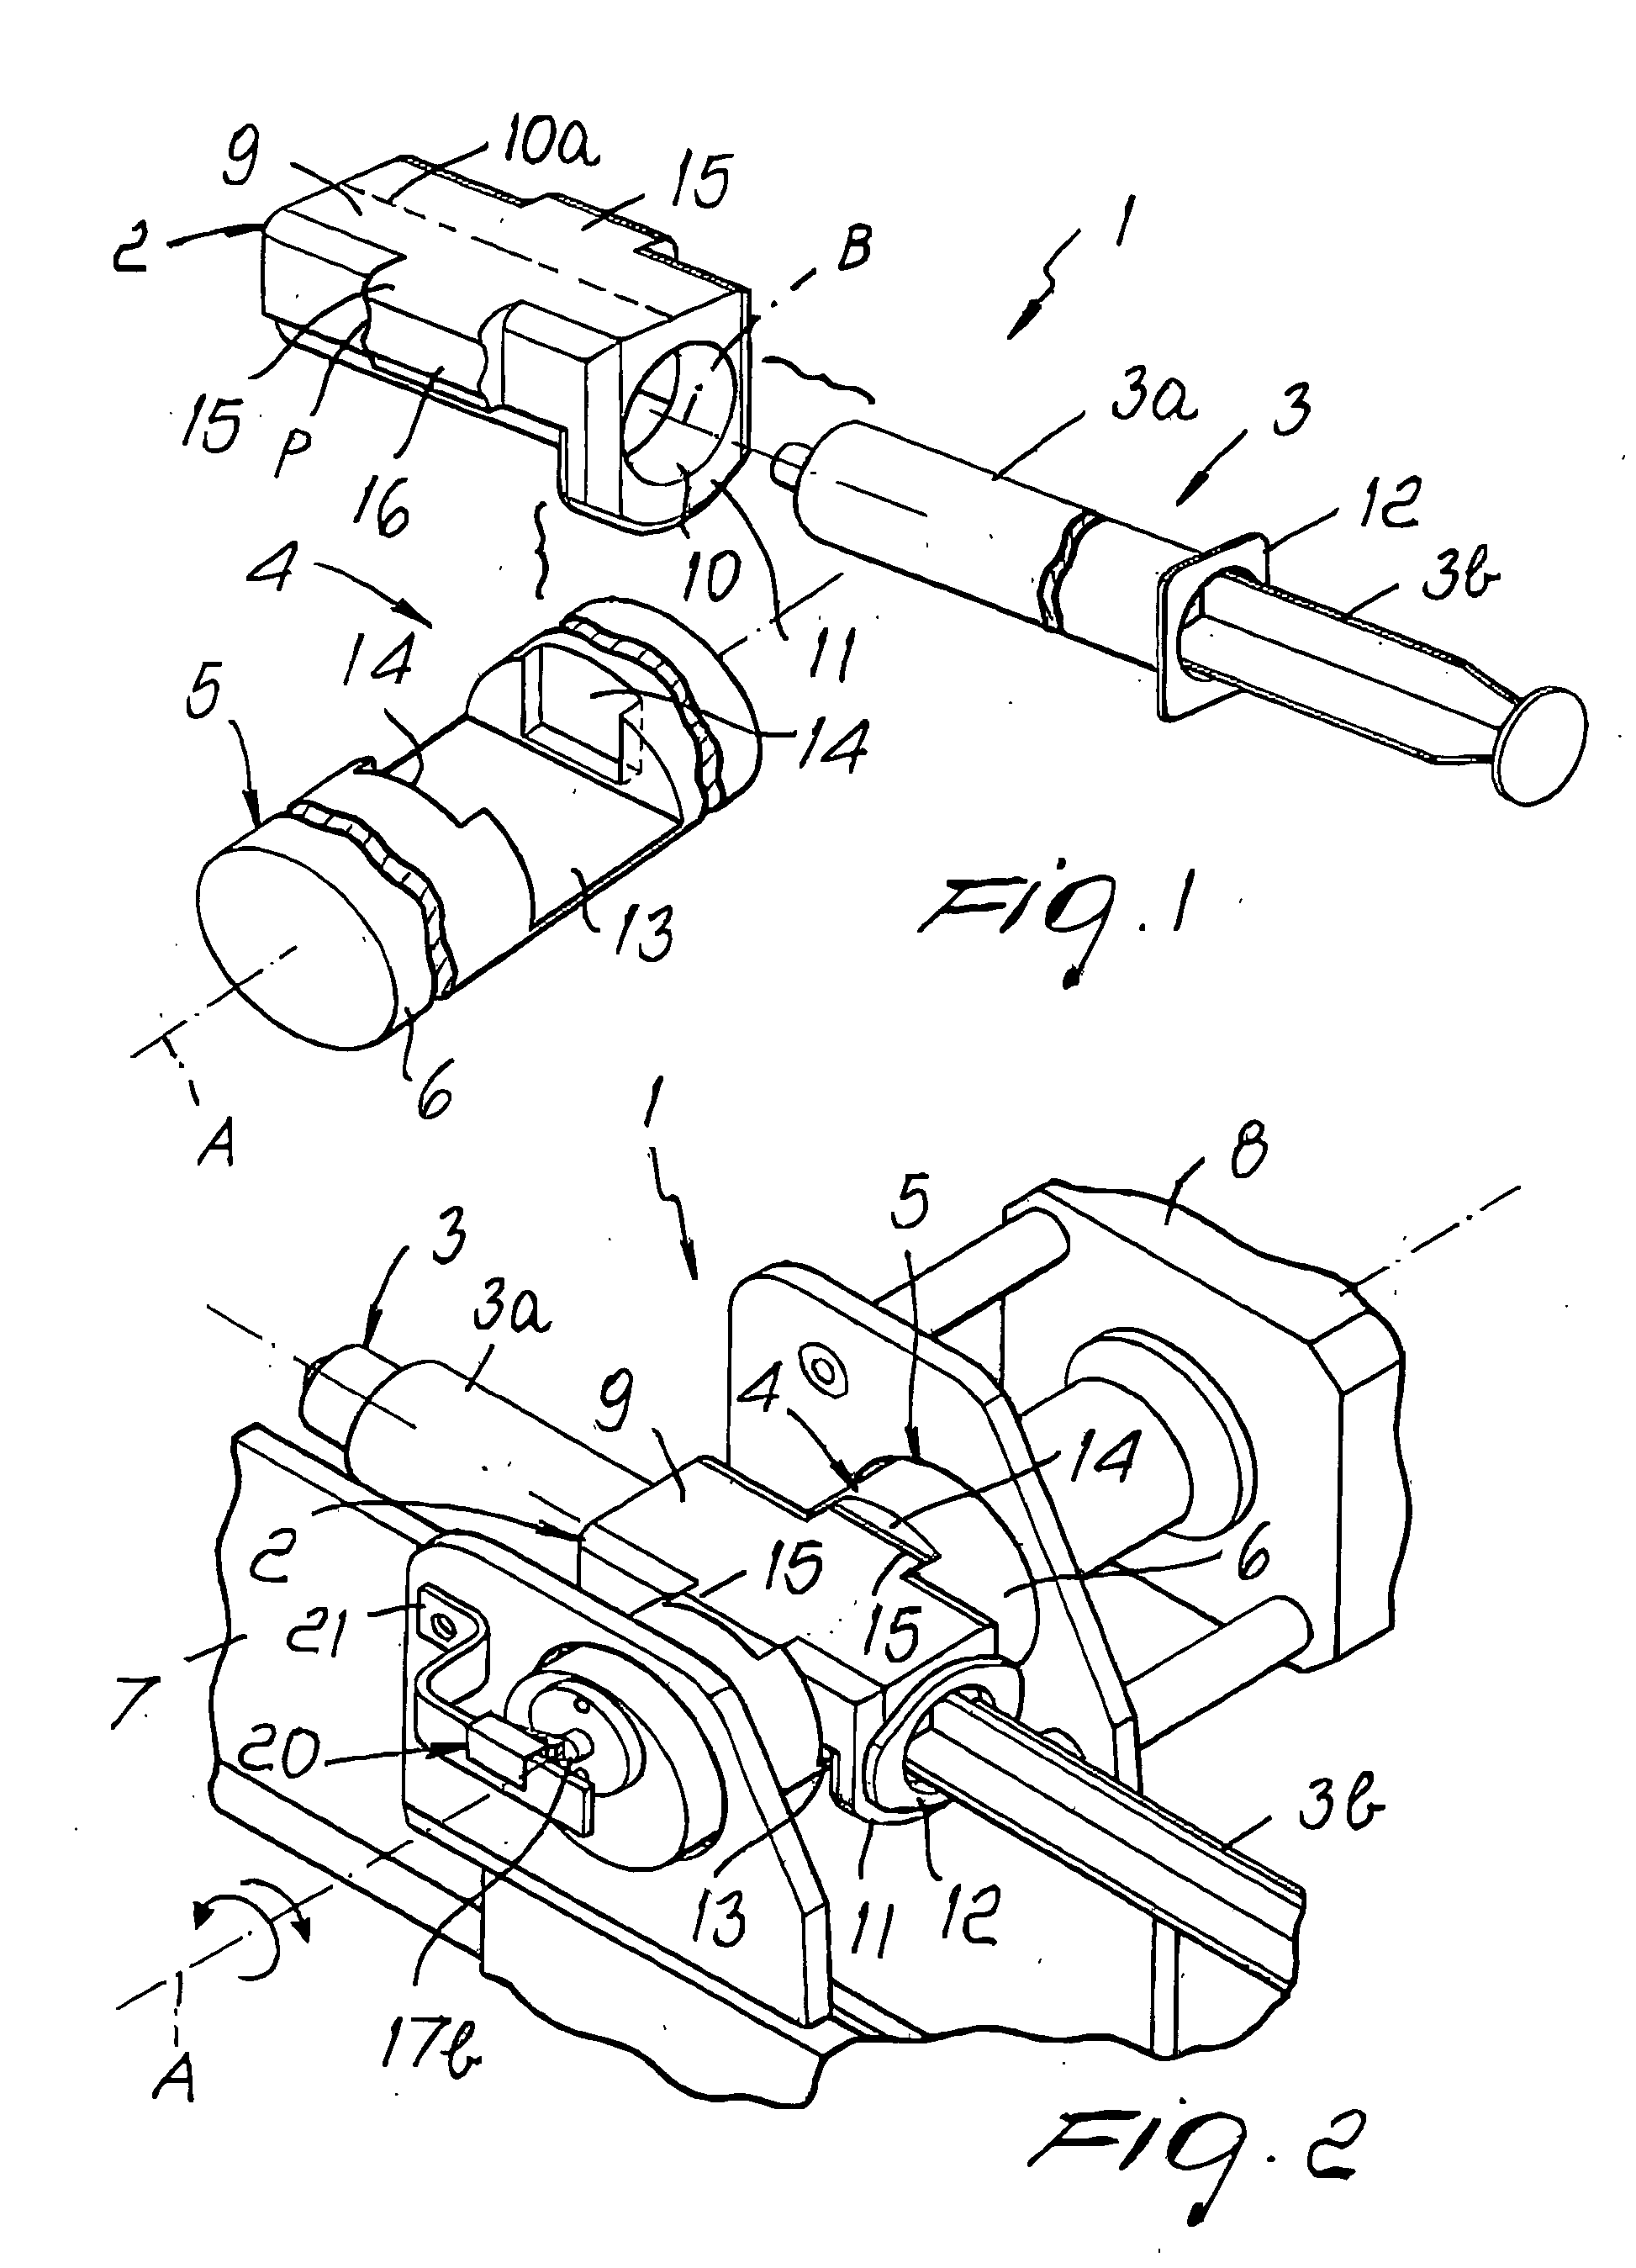 Device for locking syringes to infusion pumps